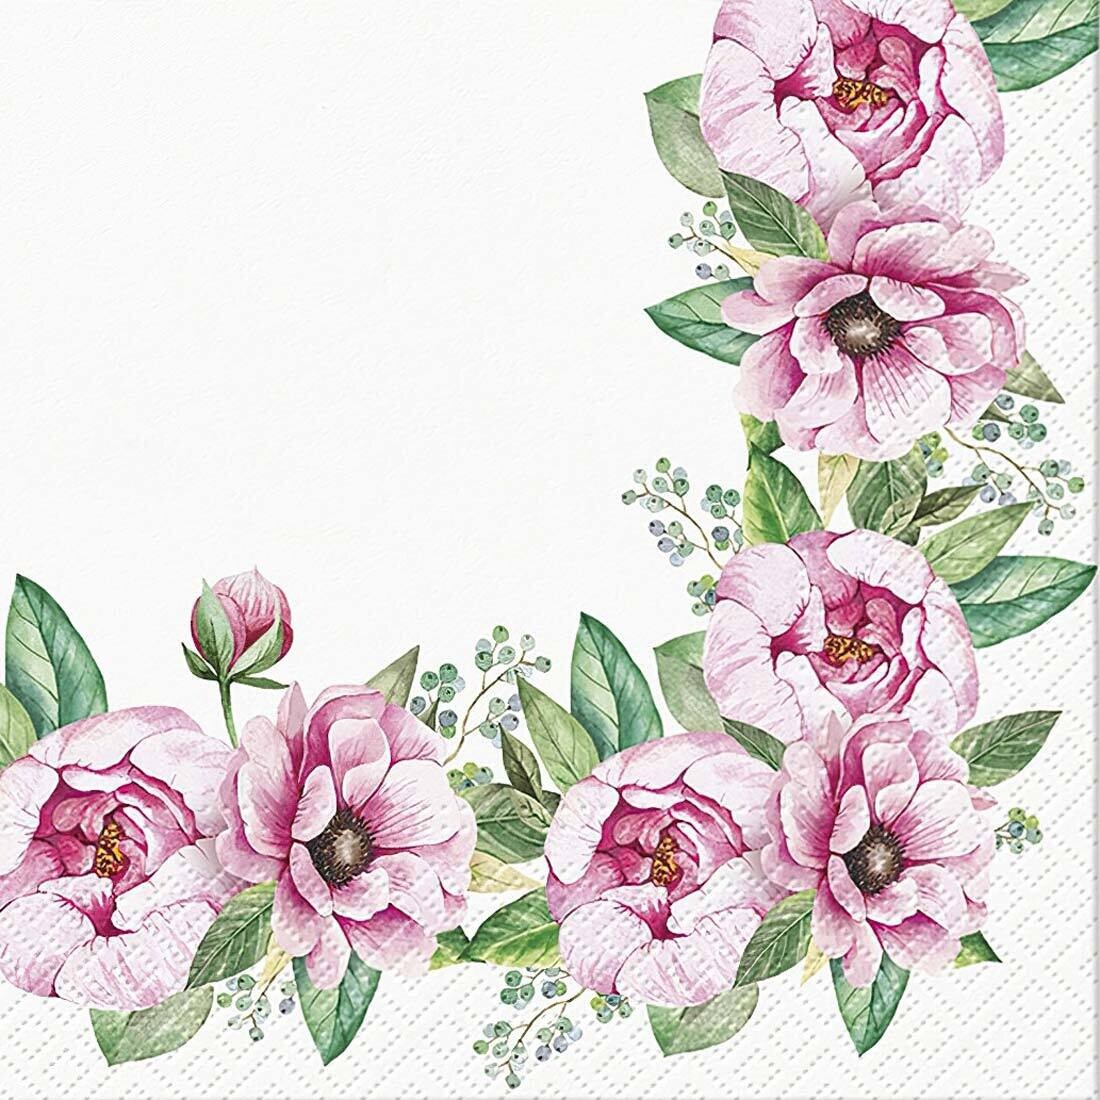 Decoupage Paper Napkins - Floral - Floral Border (1 Sheet) Out of Stock